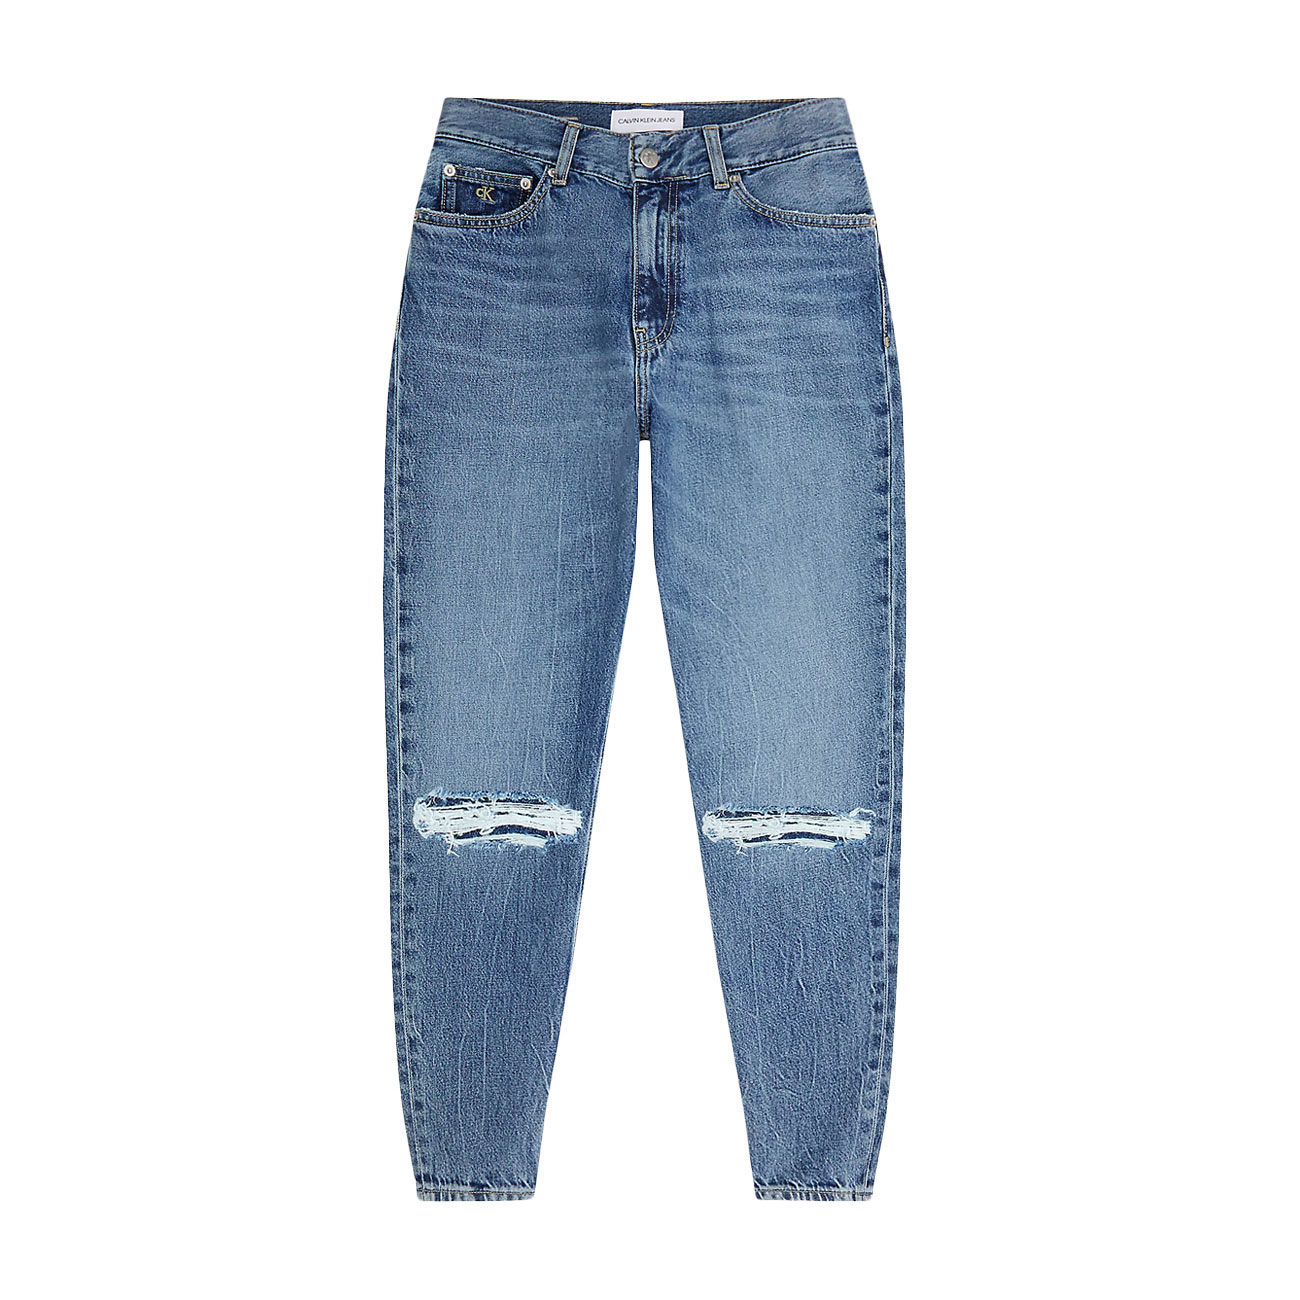 CALVIN KLEIN JEANS HIGH WAIST MOM JEANS WITH RIPS Woman Denim